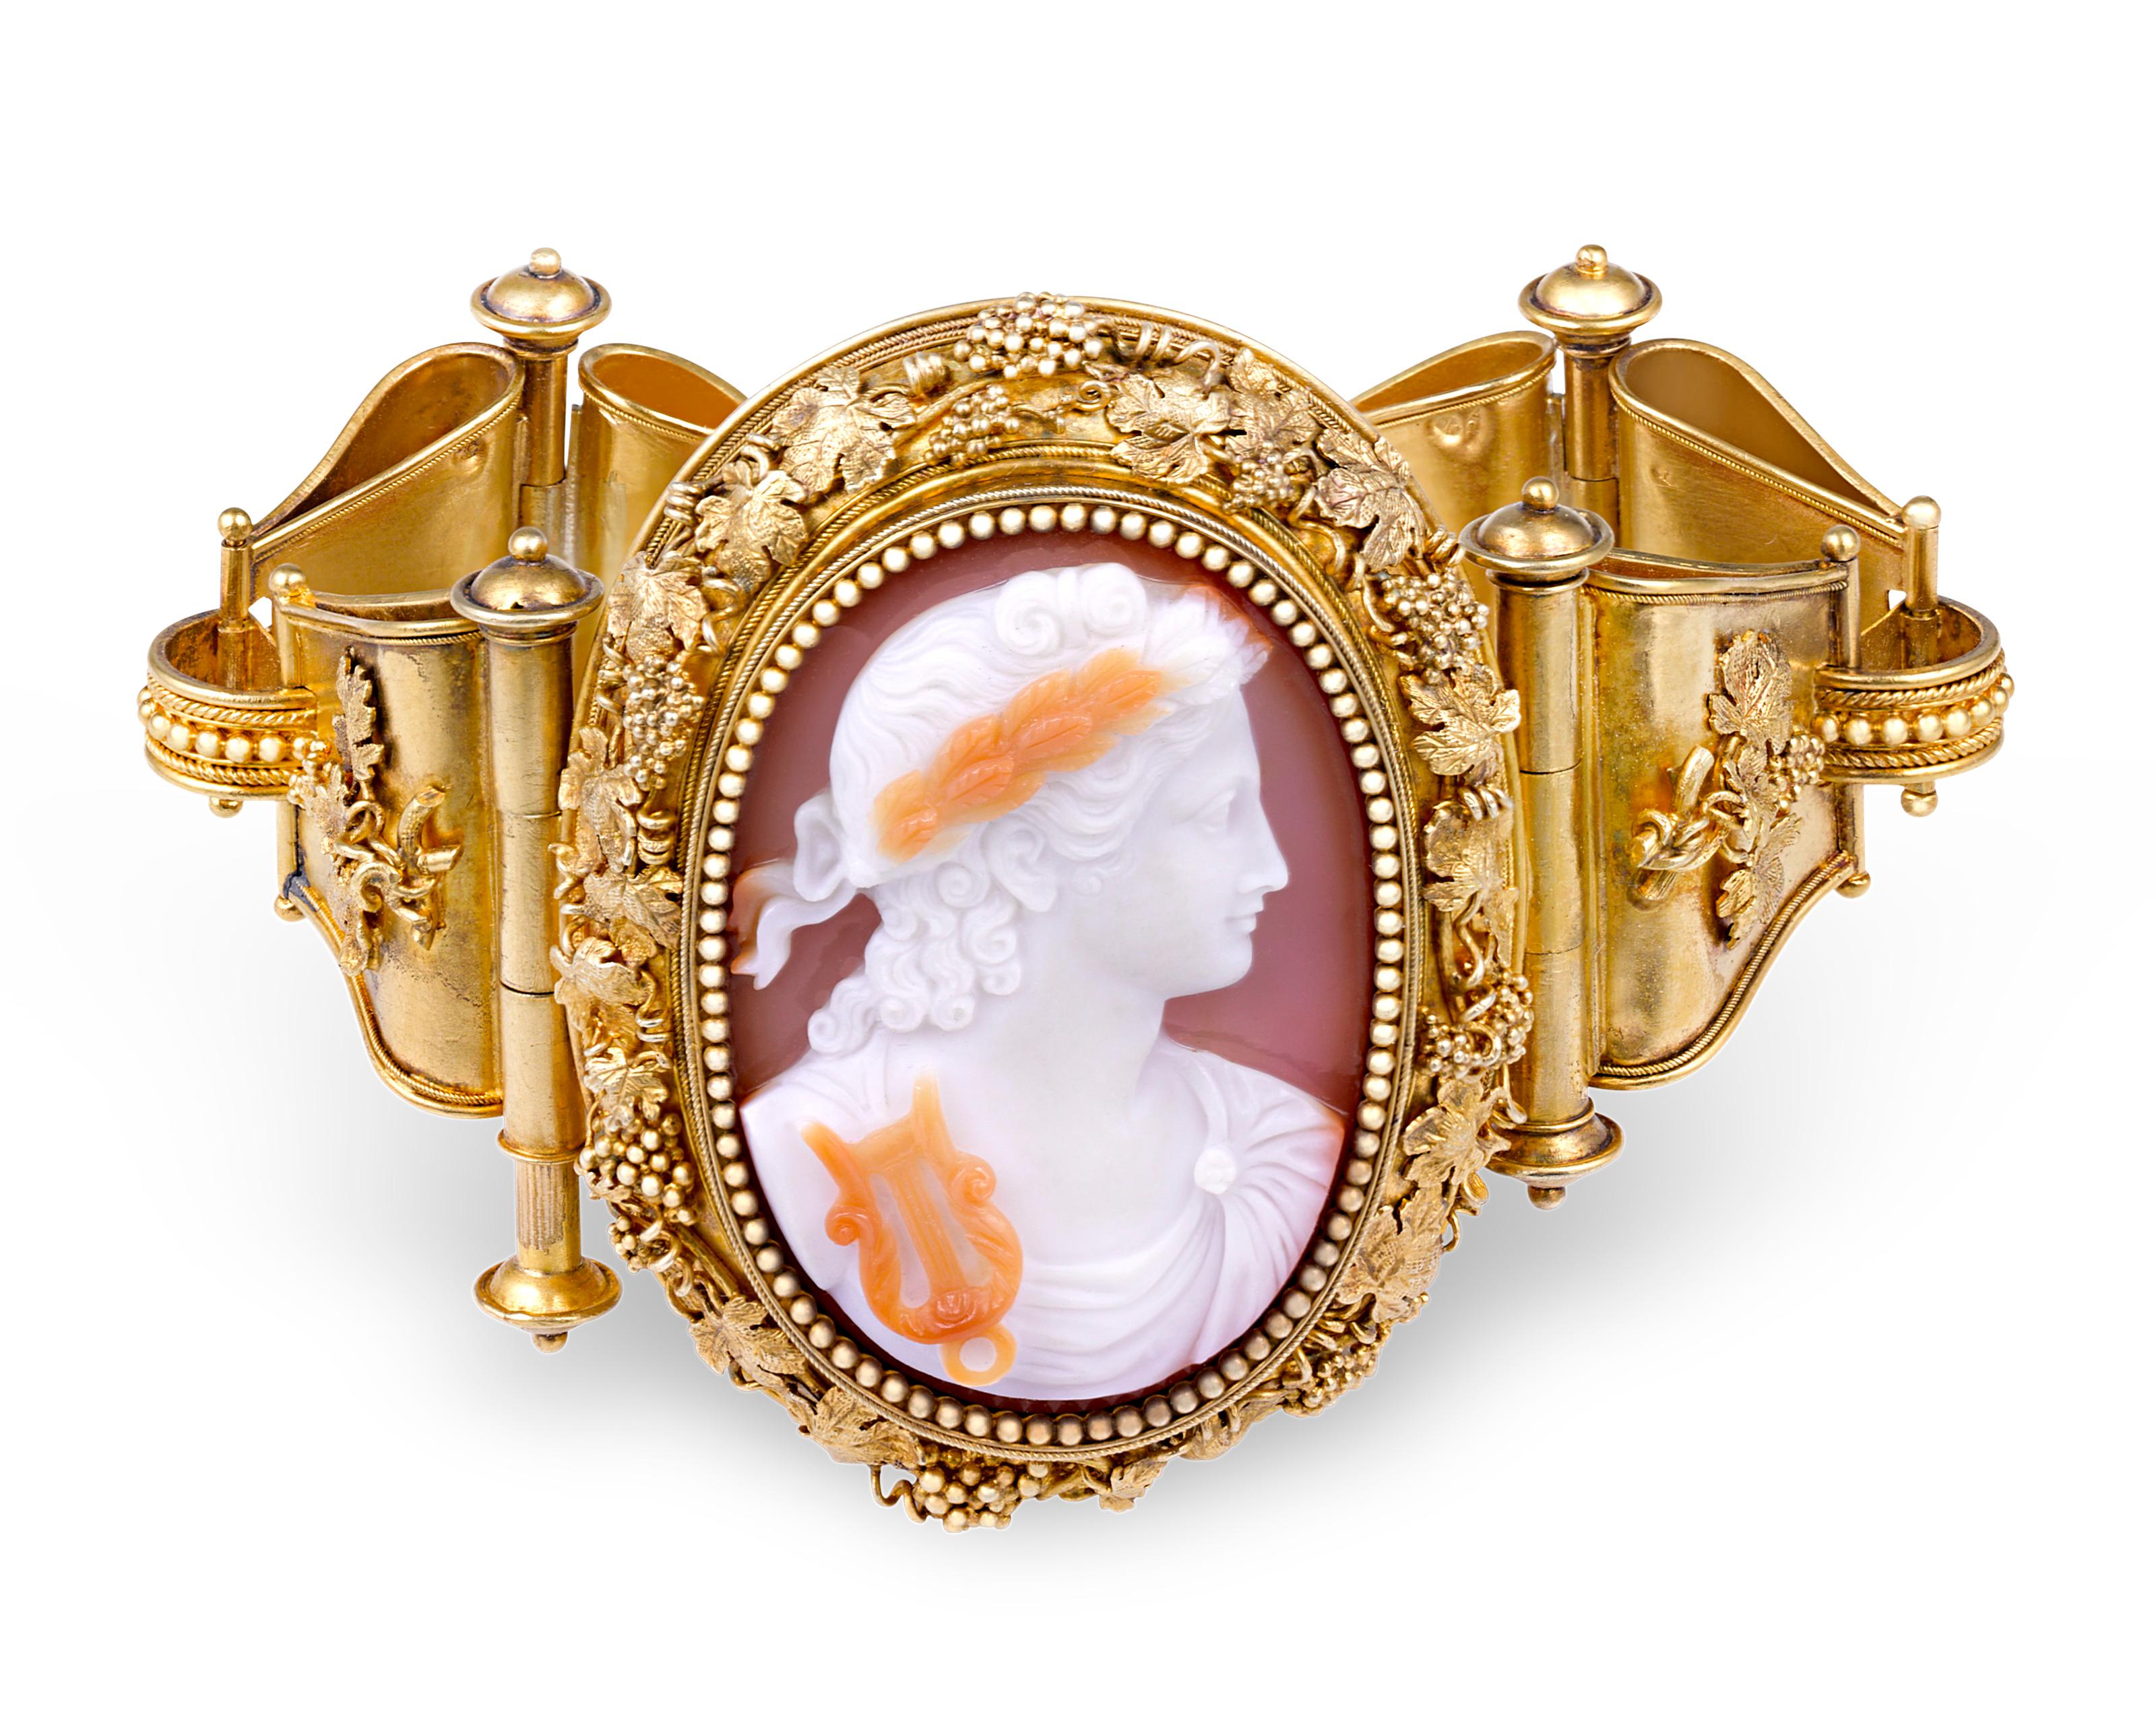 Pure Victorian elegance, this spectacular collection is truly jewelry as art. Four exquisitely carved agate and cornaline cameos fit seamlessly within bold flourishes of 18K yellow gold in this jewelry suite comprising a bracelet, brooch and